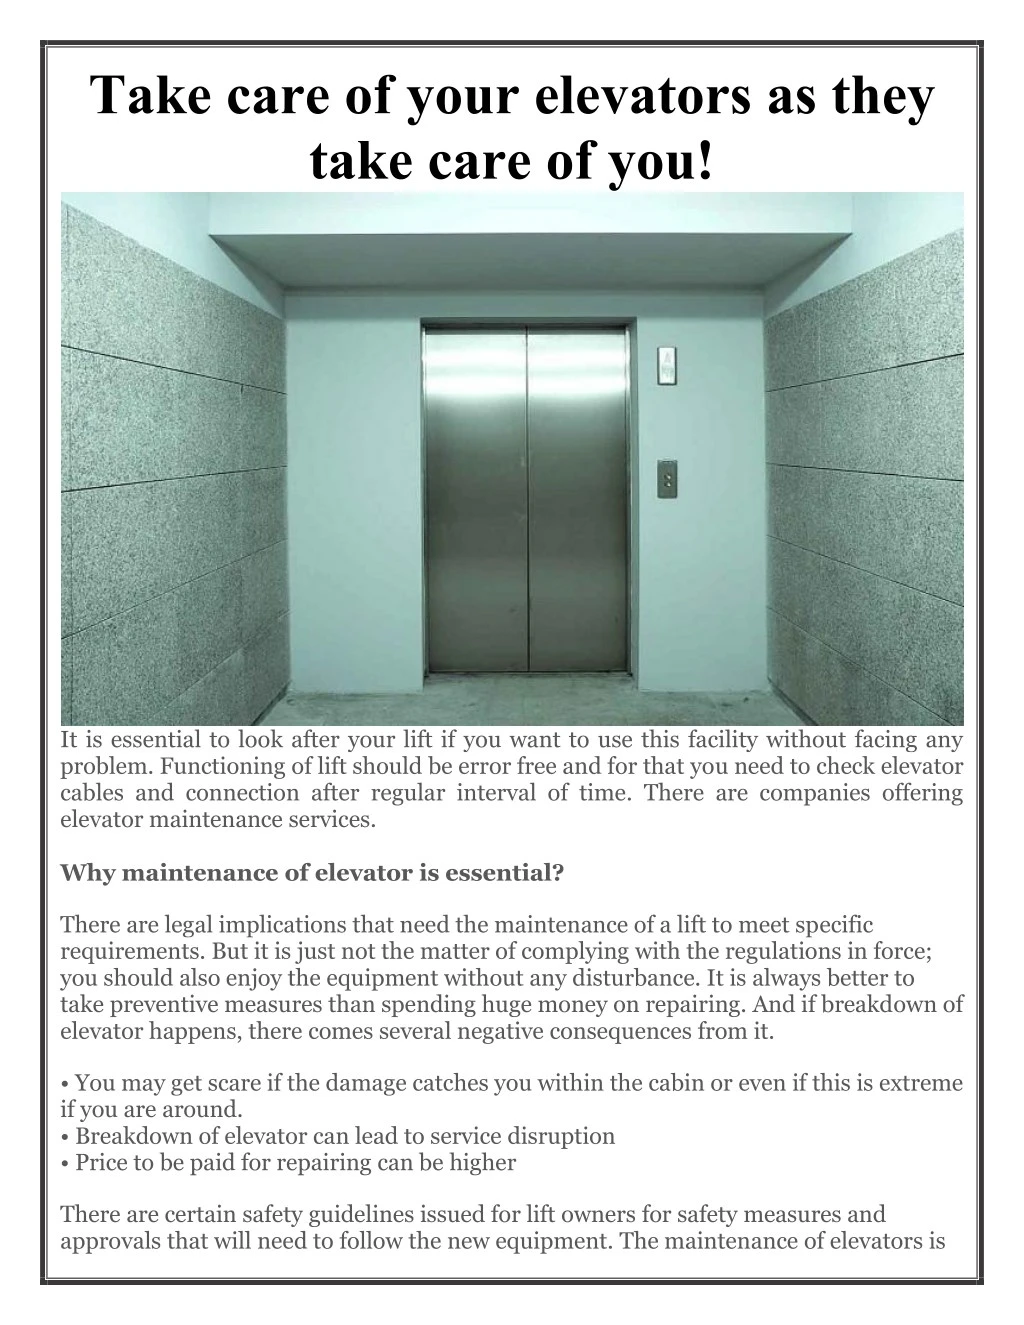 take care of your elevators as they take care